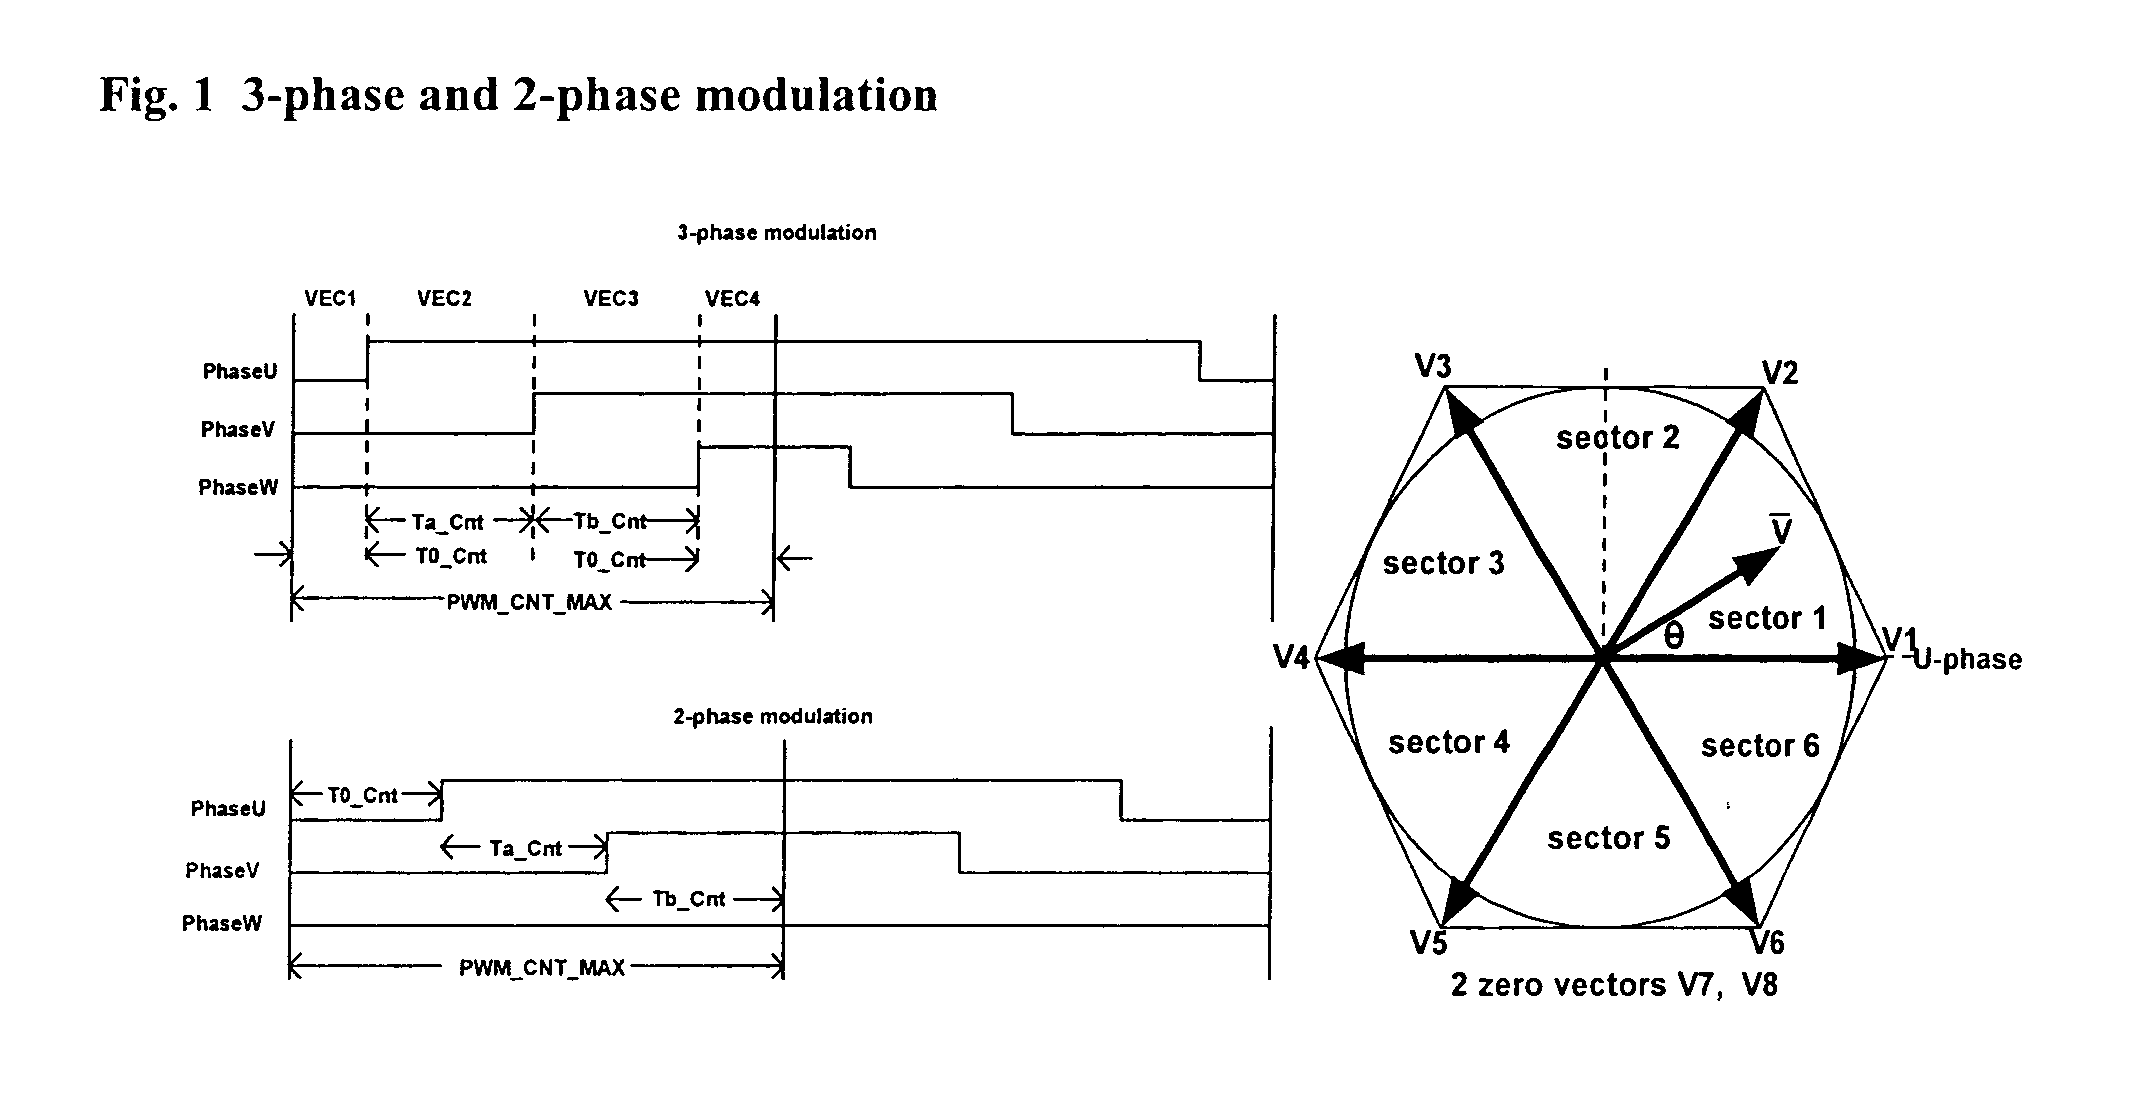 Space vector PWM modulator for permanent magnet motor drive